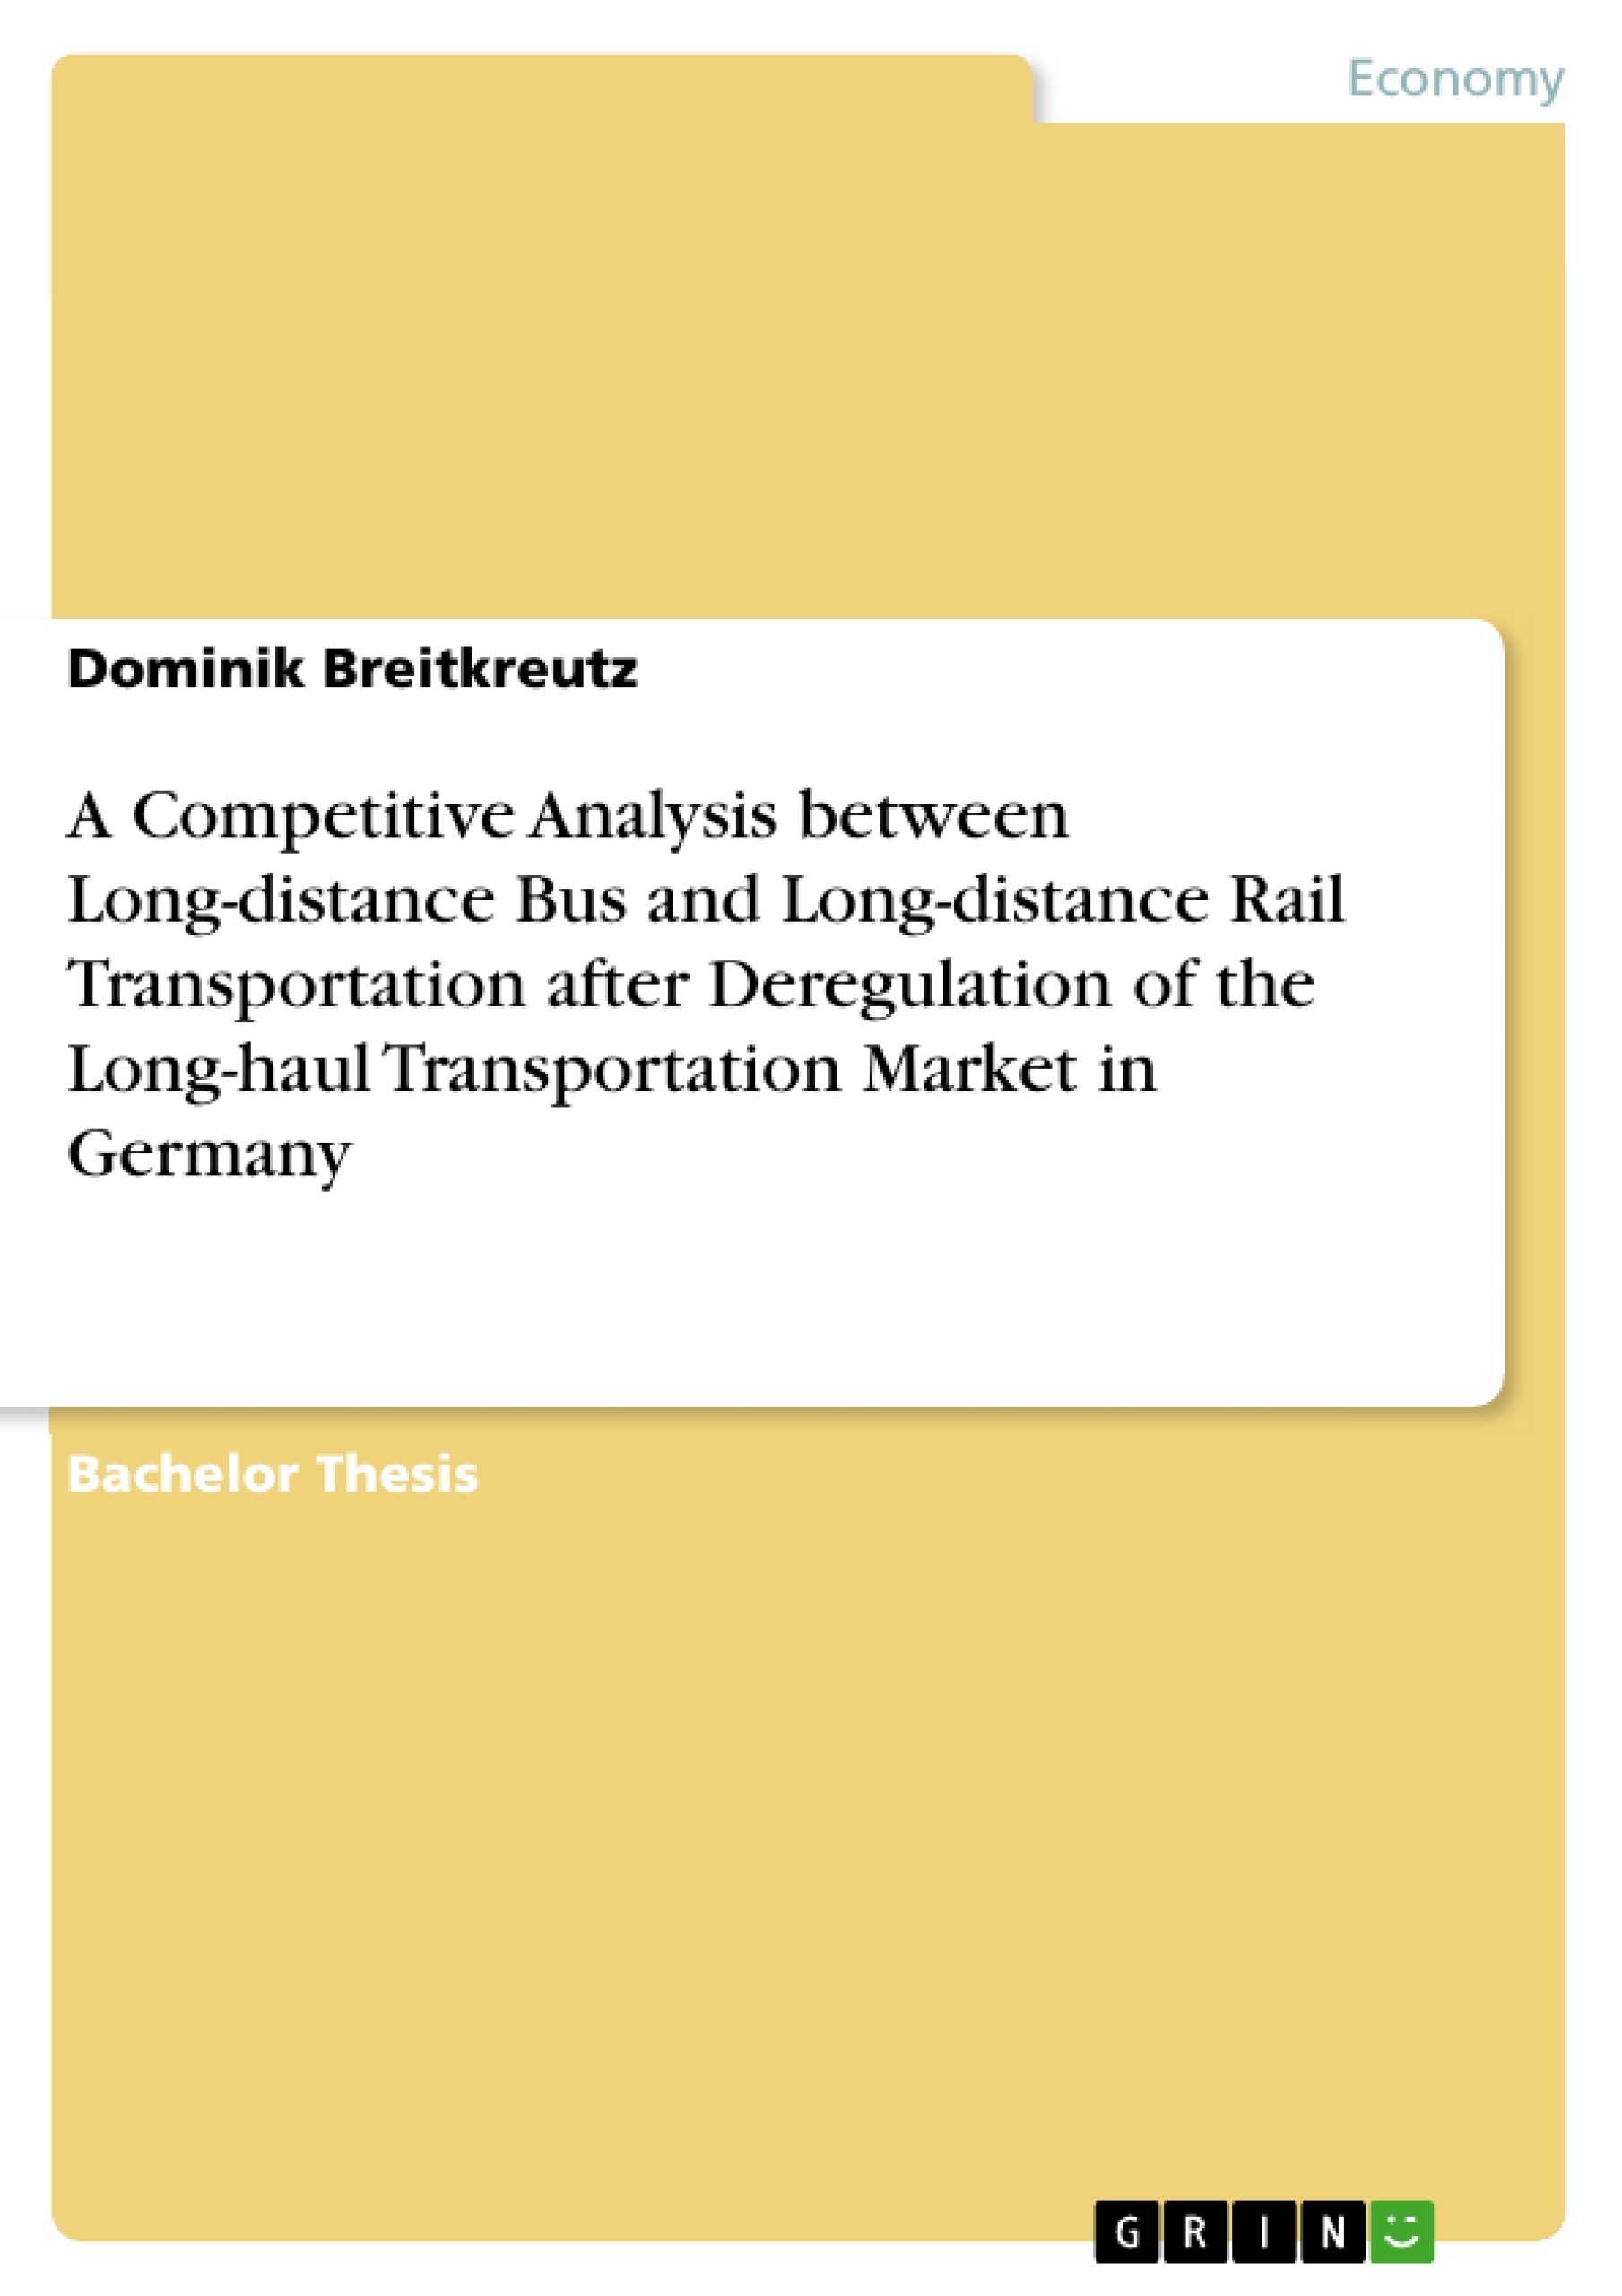 Título: A Competitive Analysis between Long-distance Bus and Long-distance Rail Transportation after Deregulation of the Long-haul Transportation Market in Germany